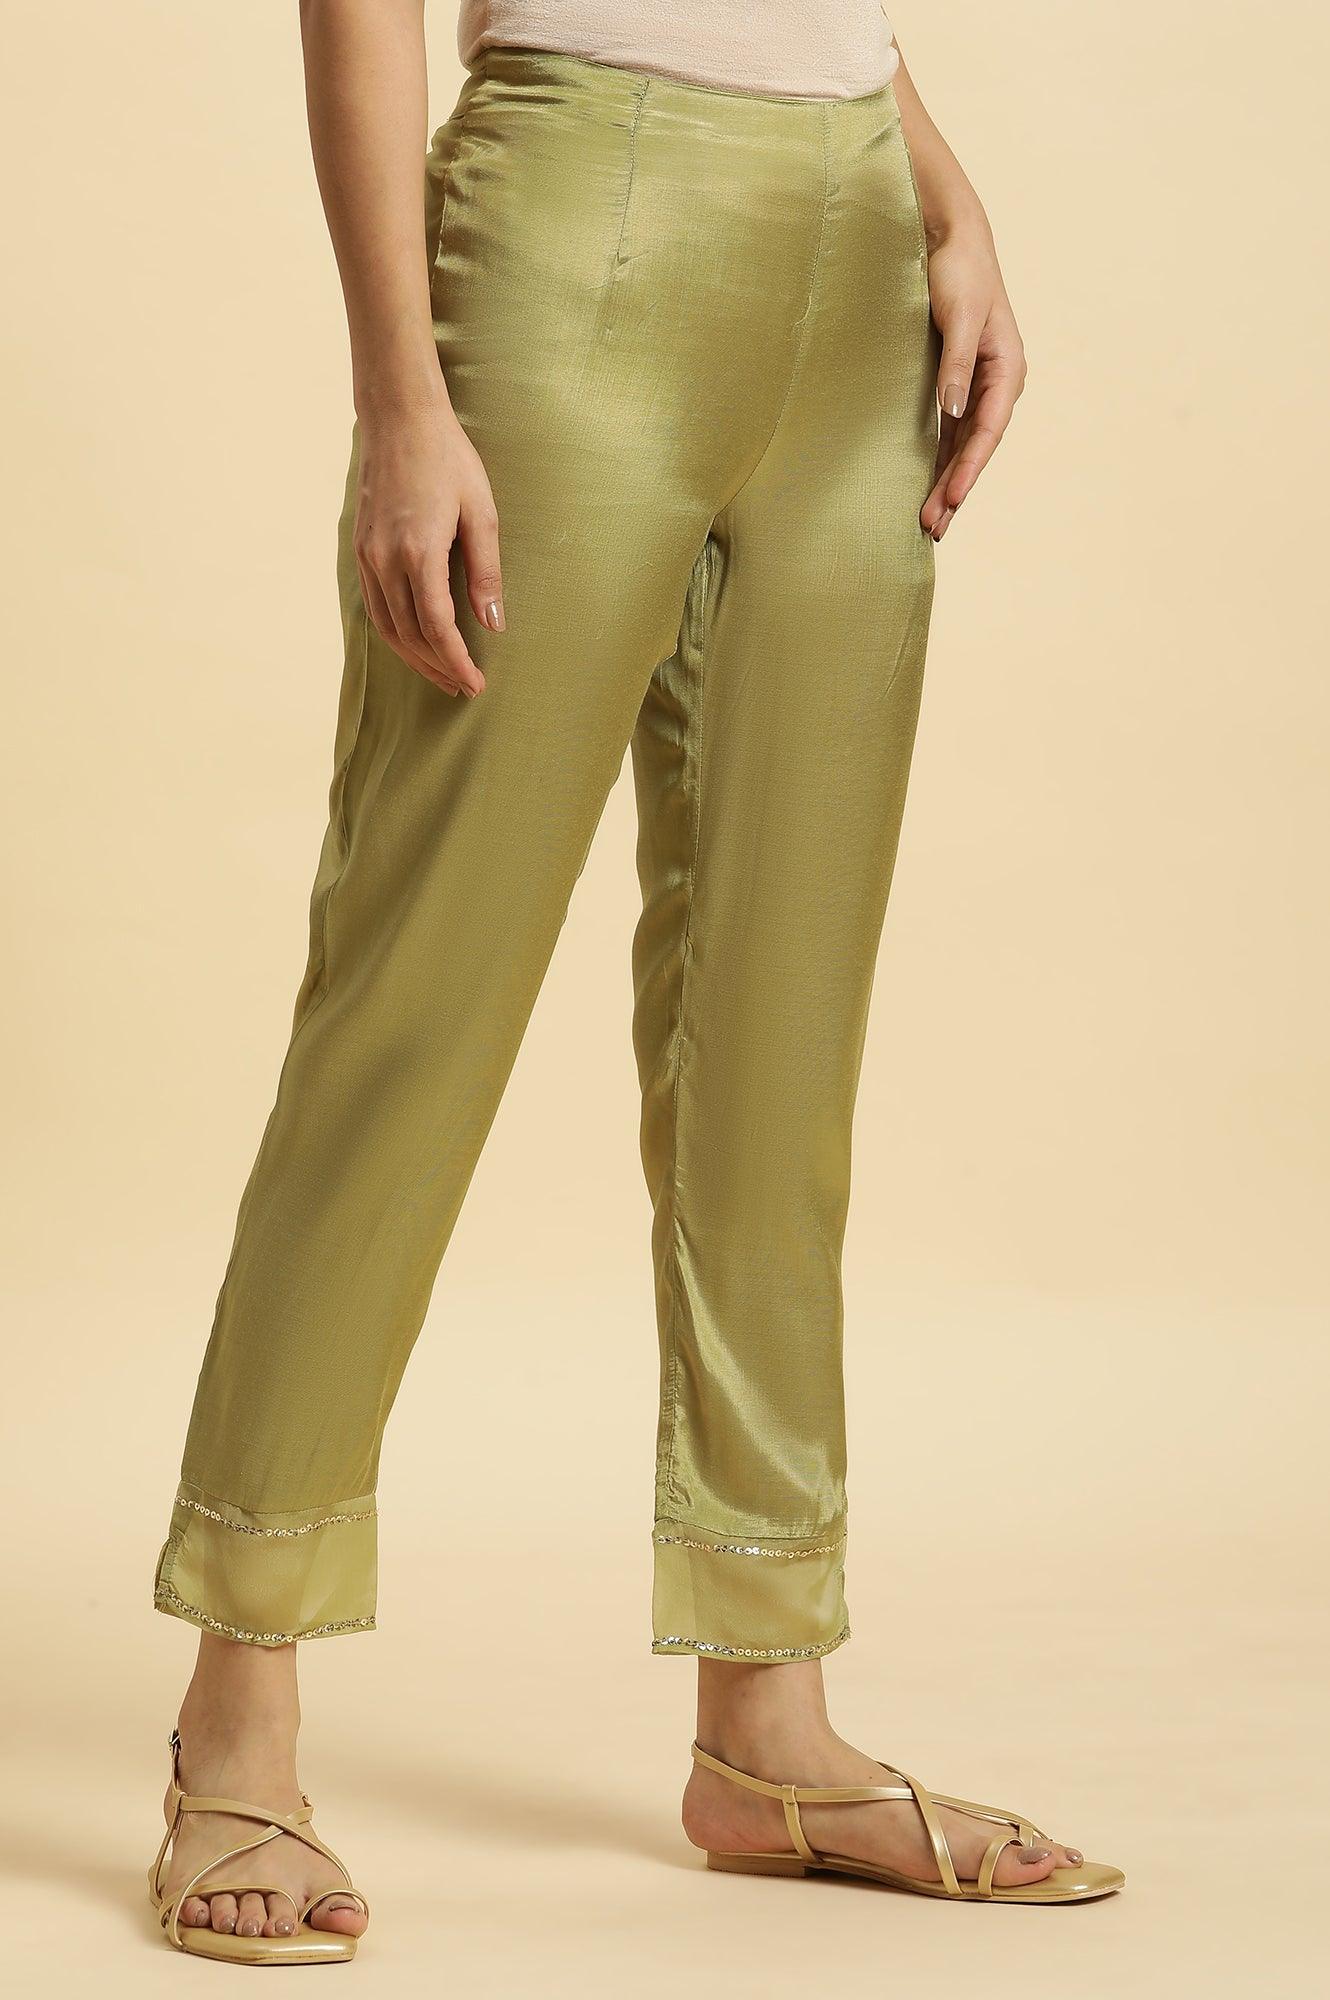 Green Solid Slim Pants With Organza Insert - wforwoman